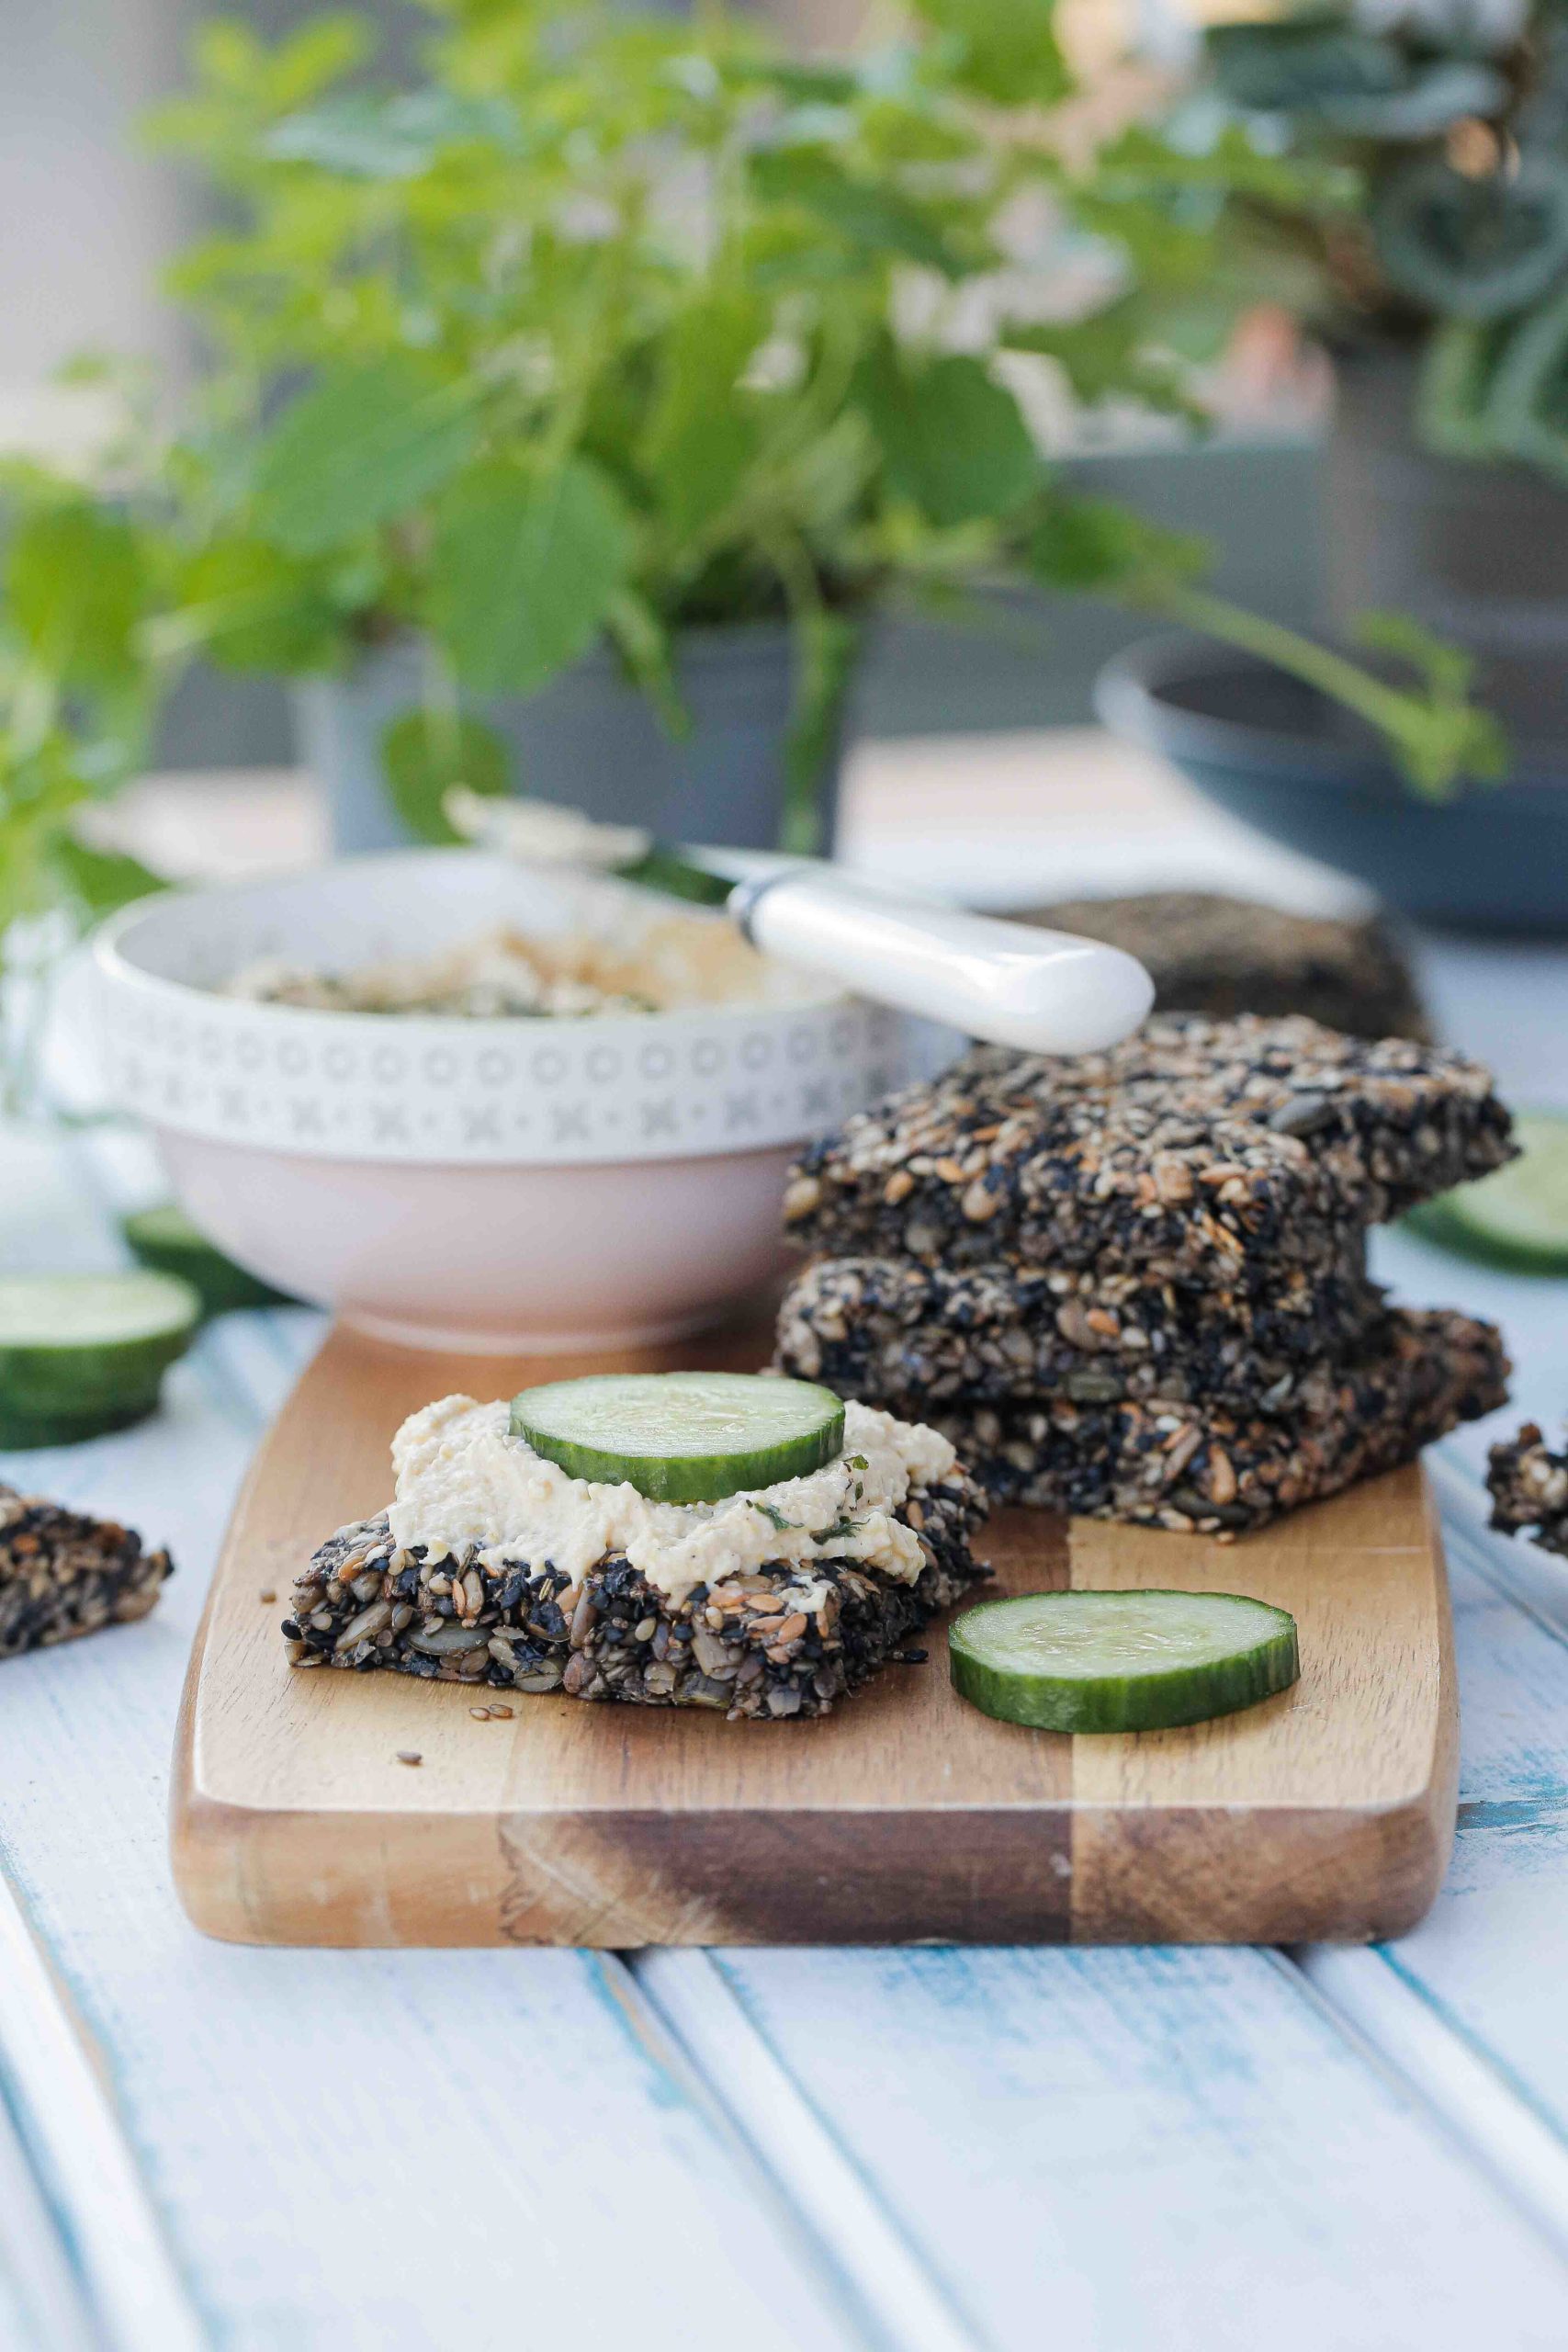 A simple and easy seaweed snacks recipe, these healthy little crackers are full of seeds and crunchy flavour! So simple to make and perfect for mid morning hungries or after school snacks! Recipe on thecookandhim.com #seaweedsnacksrecipe #healthysnacks #healthycrackers